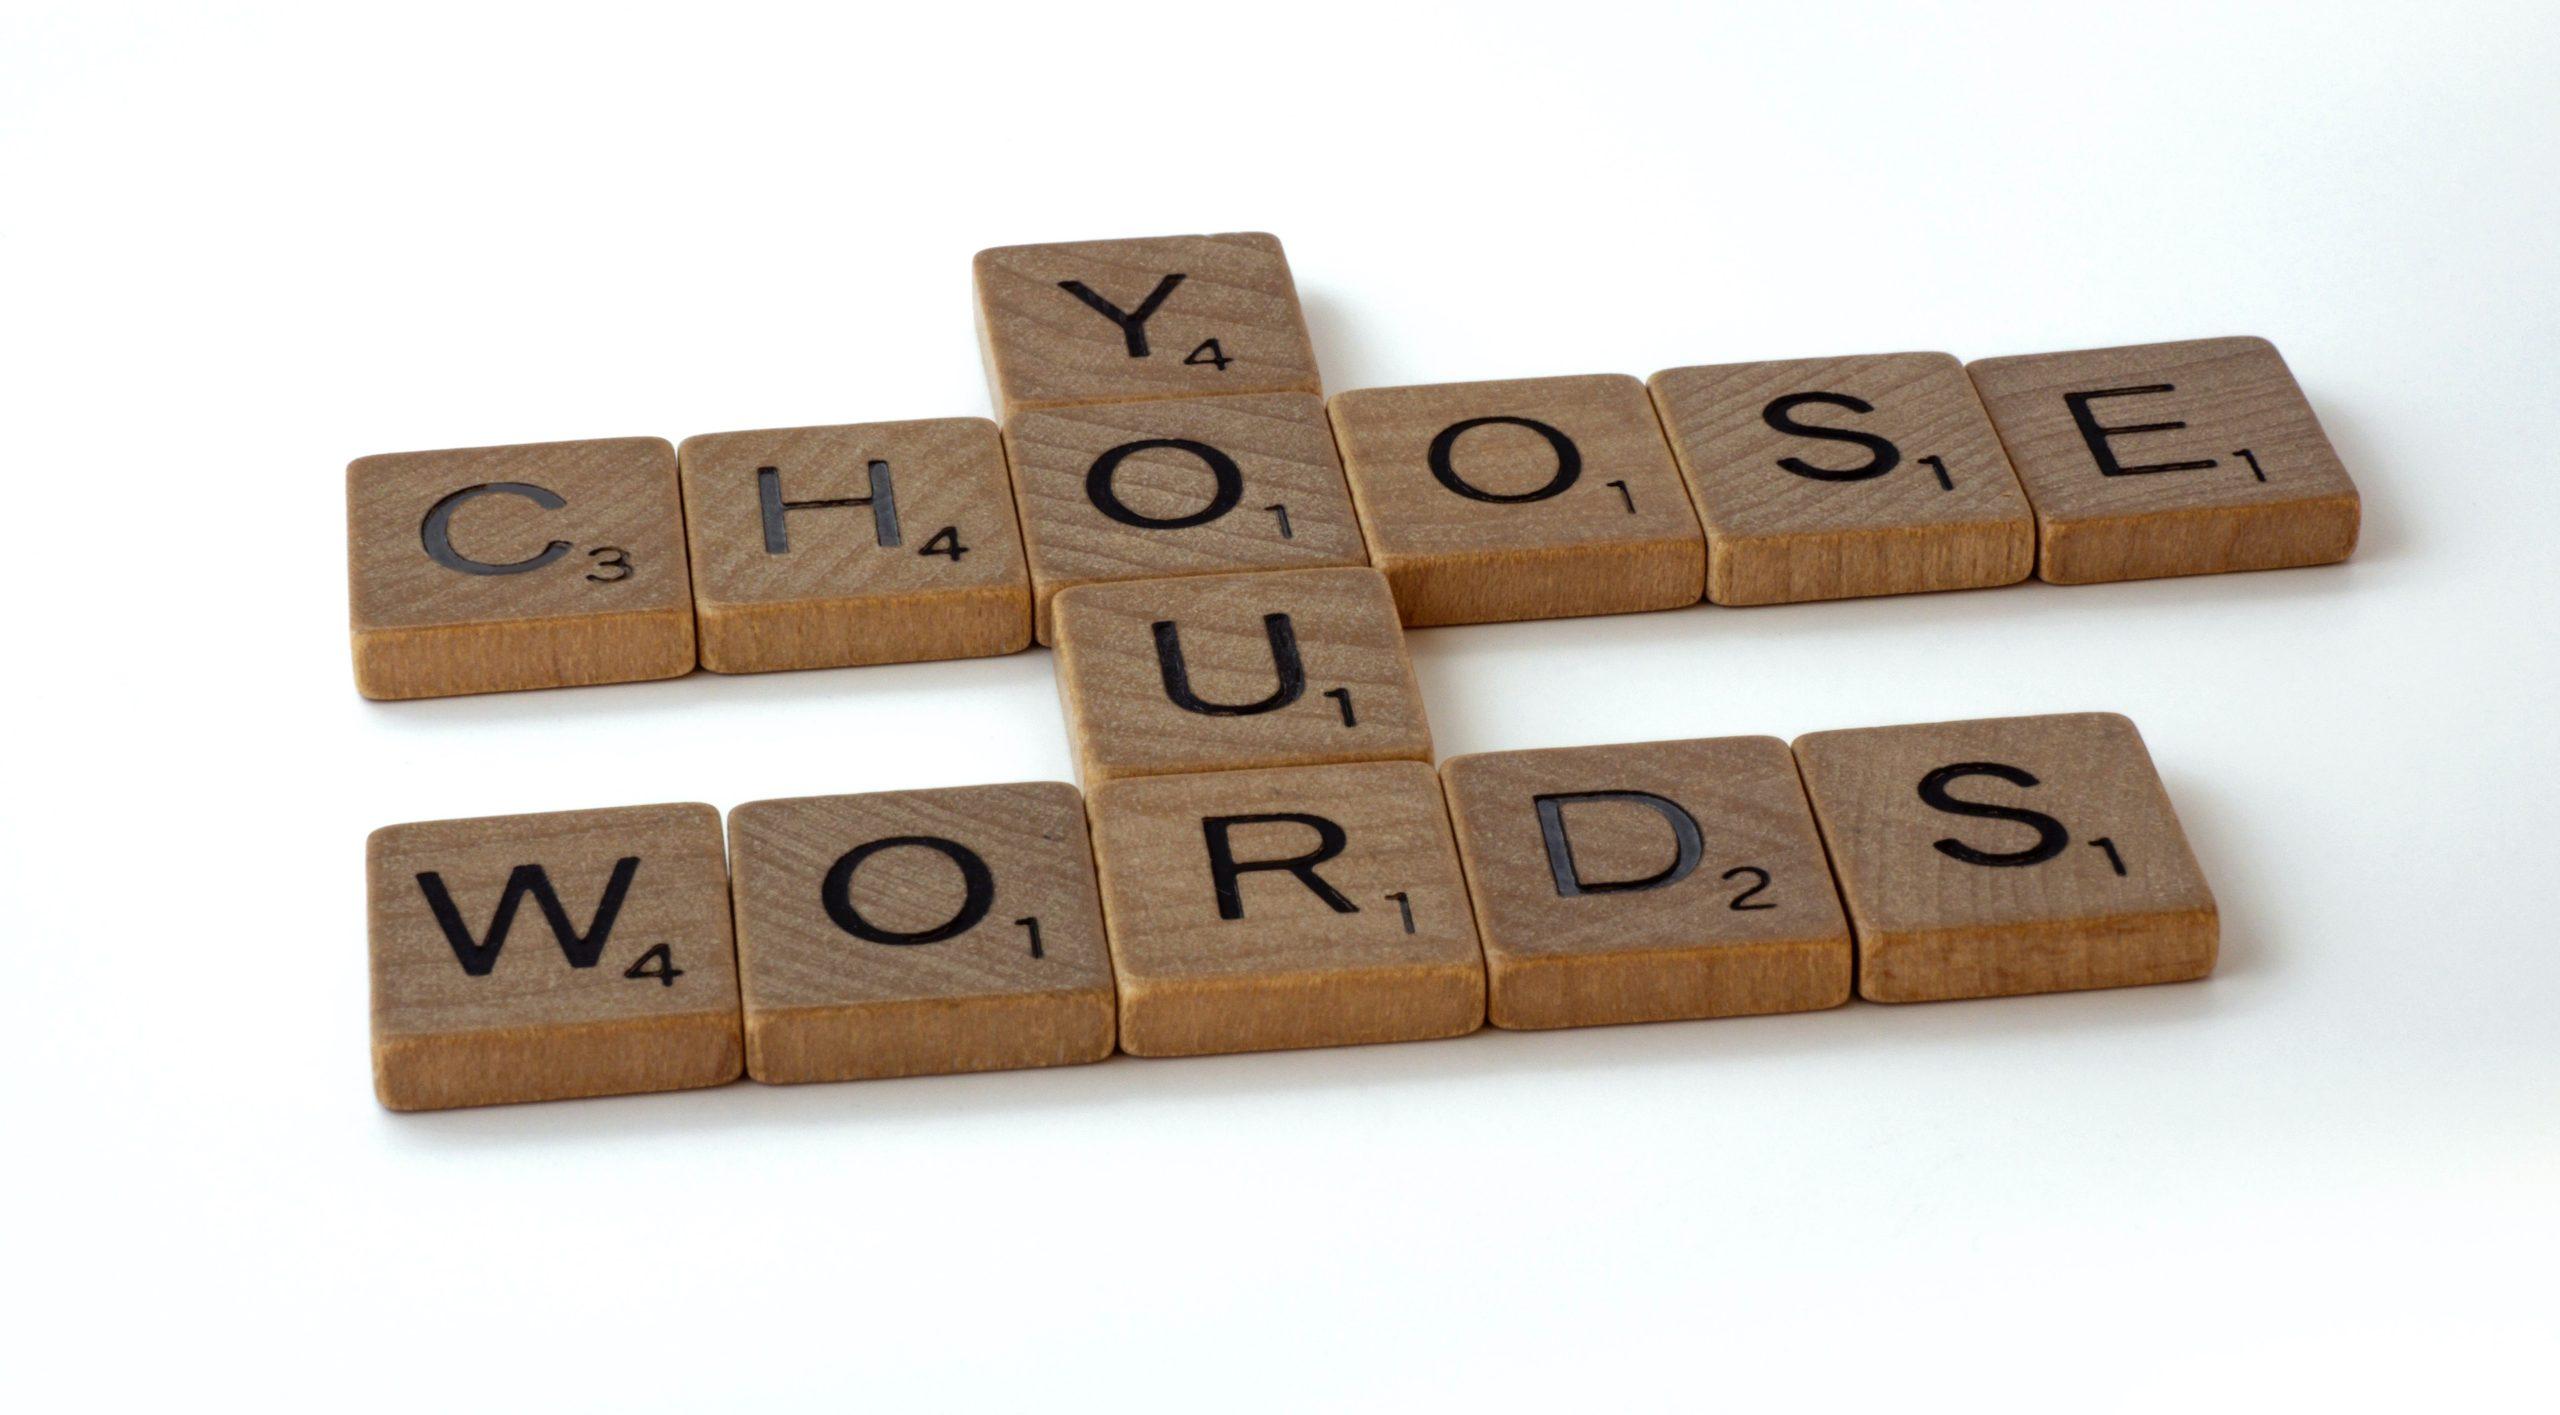 Scrabble letters organised to spell out 'Choose your words'.